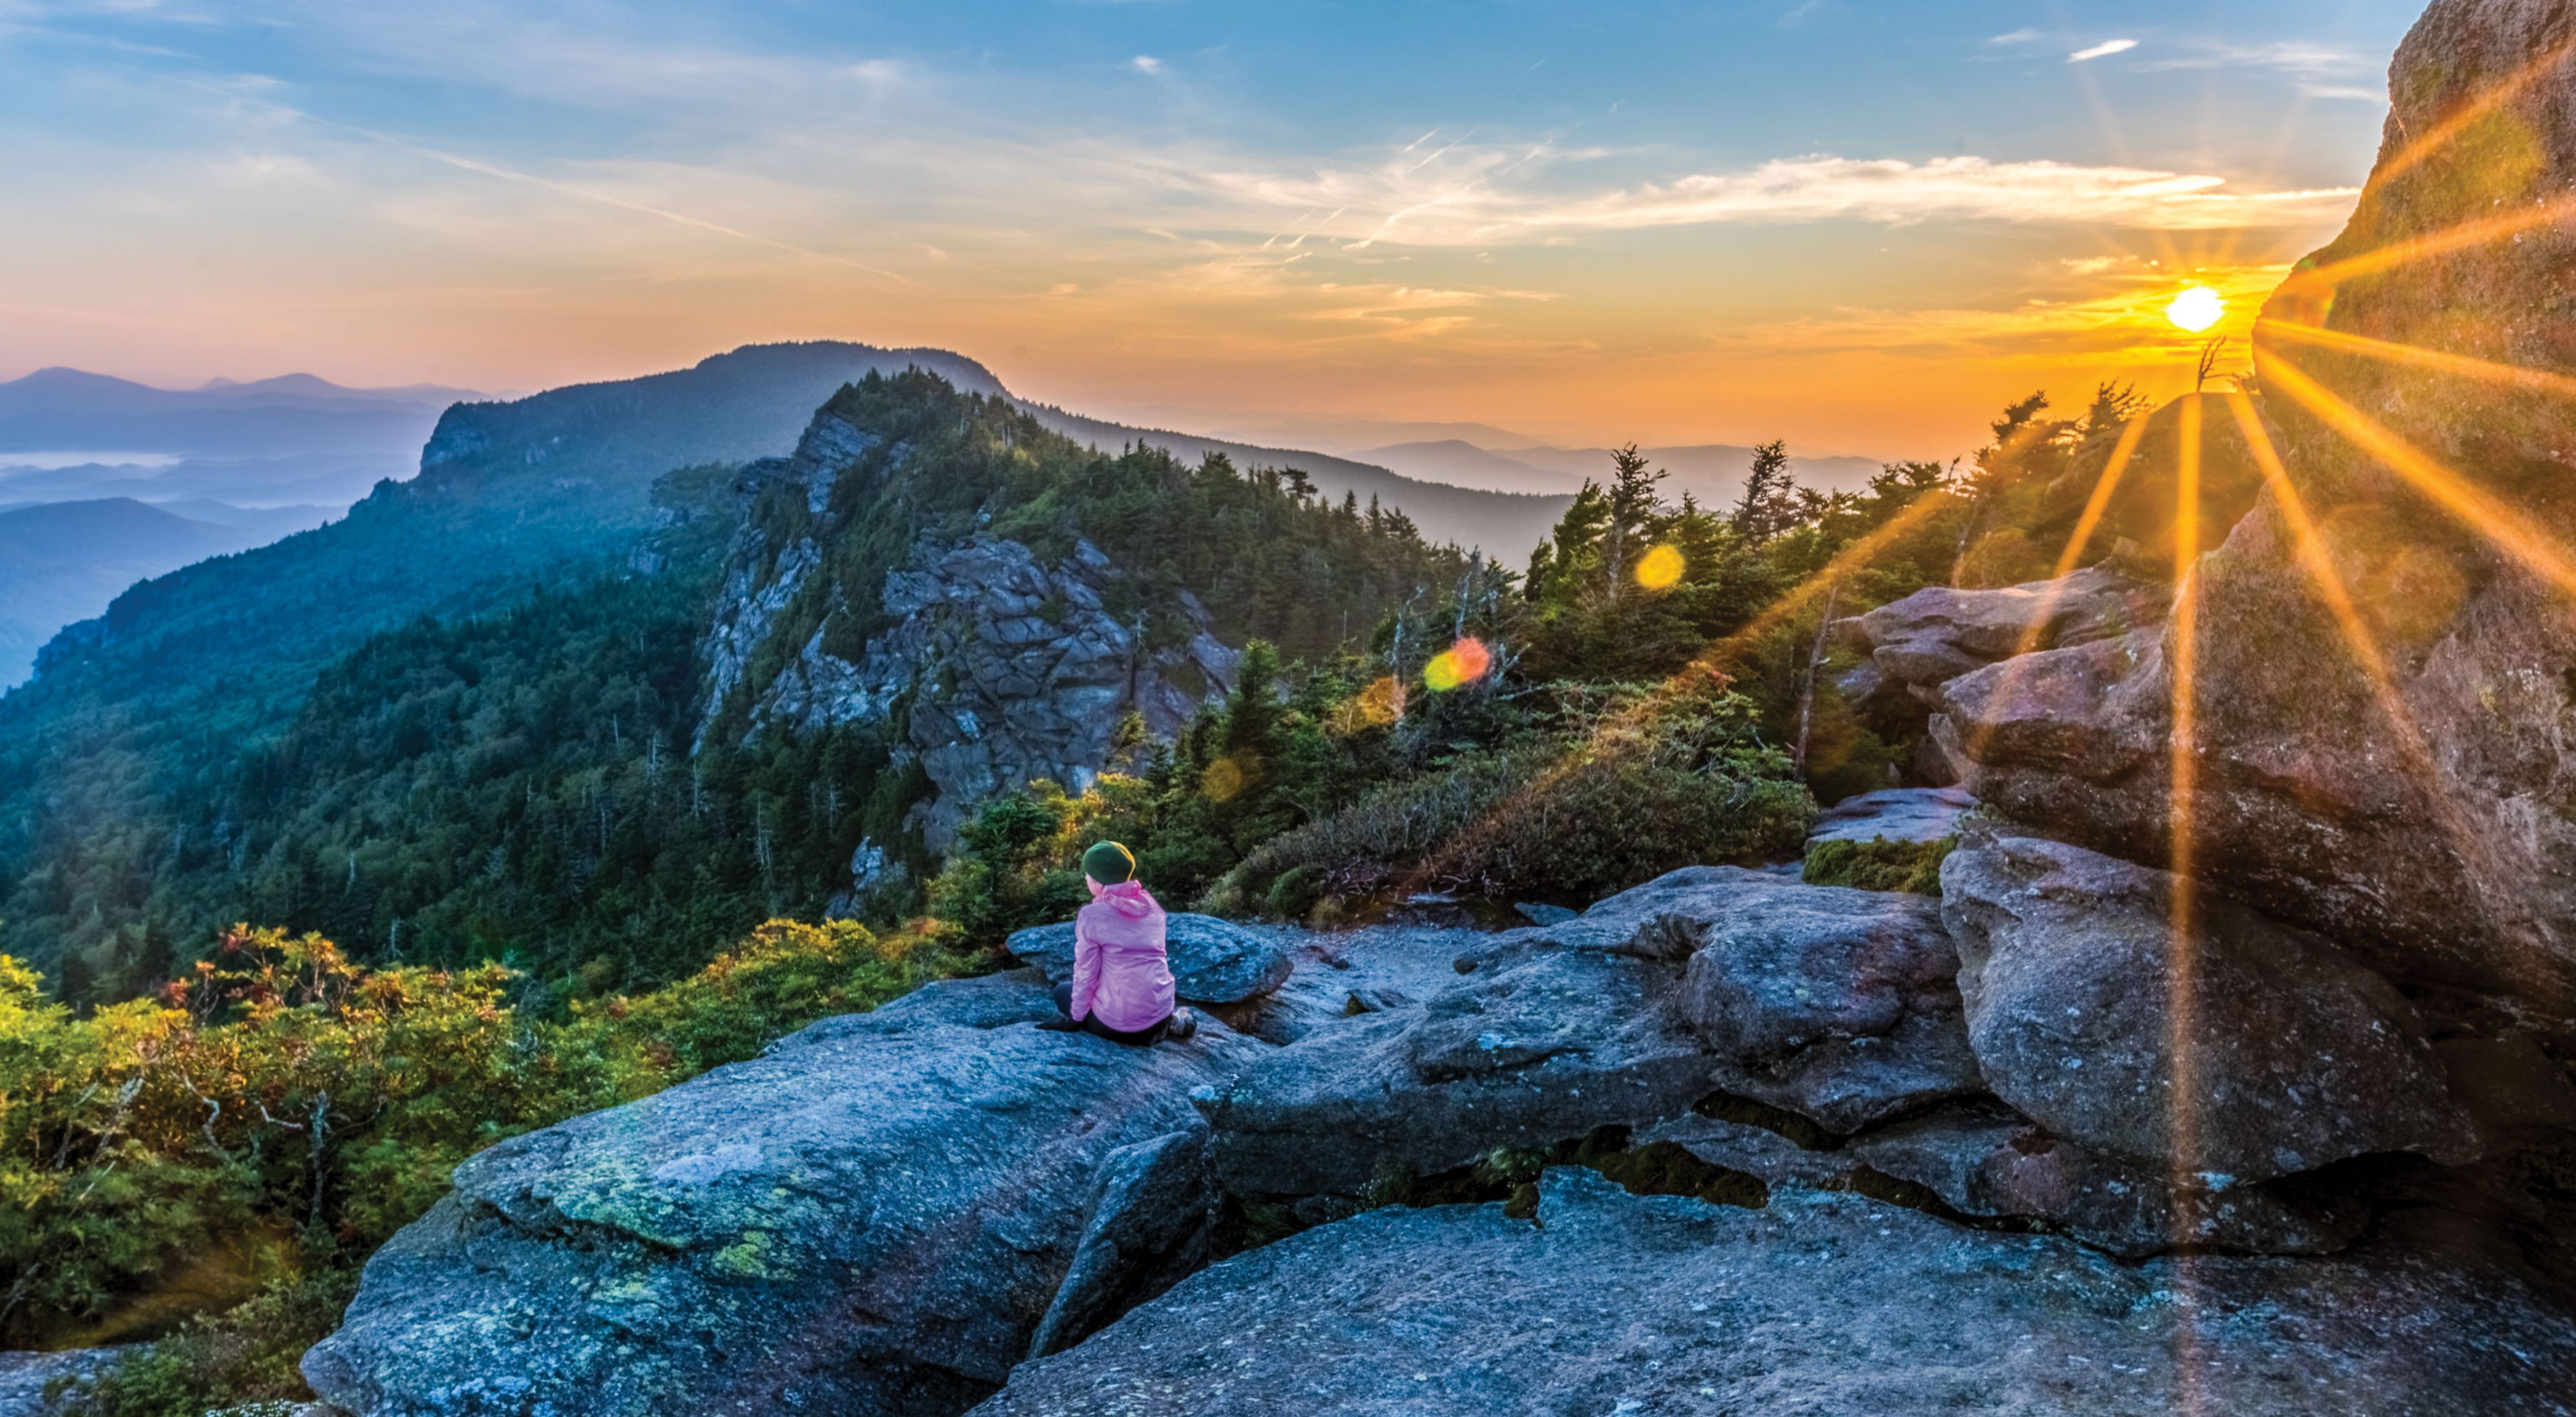 Frances experiences sunrise at Attic Window after camping on Grandfather Mountain ridge.

Ethan,
Thanks, I’m honored to be included in the running.
Here’s the info you requested:
Jim Magruder
P.O. Box 154, Linville, NC 28646

Photo Caption:
Grandfather Mountain Sunrise
The photographer’s wife Frances takes in sunrise from the Attic Window peak on Grandfather Mountain, North Carolina. 
Through the combined efforts of The Nature Conservancy, the state of North Carolina, and the owners of Grandfather Mountain, Inc. Grandfather Mountain State Park was established in 2009 to preserve and protect Grandfather, one of the highest peaks in the Blue Ridge Mountains and one of the oldest mountains in North America. Grandfather Mountain is home to a wide variety of rare plants and animals and offers some of the most rugged and spectacular hiking in the eastern US.

This image is a two exposure HDR merge. One exposure for the sunrise sky and one for the rocky foreground. I cropped the merged HDR image to a panorama format to eliminate  some bland sky and rock at top and bottom.

Because of email size restrictions I am sending each of the 2 RAW files and the hi-res JPEG as attachments to separate emails.

Thanks,
Jim